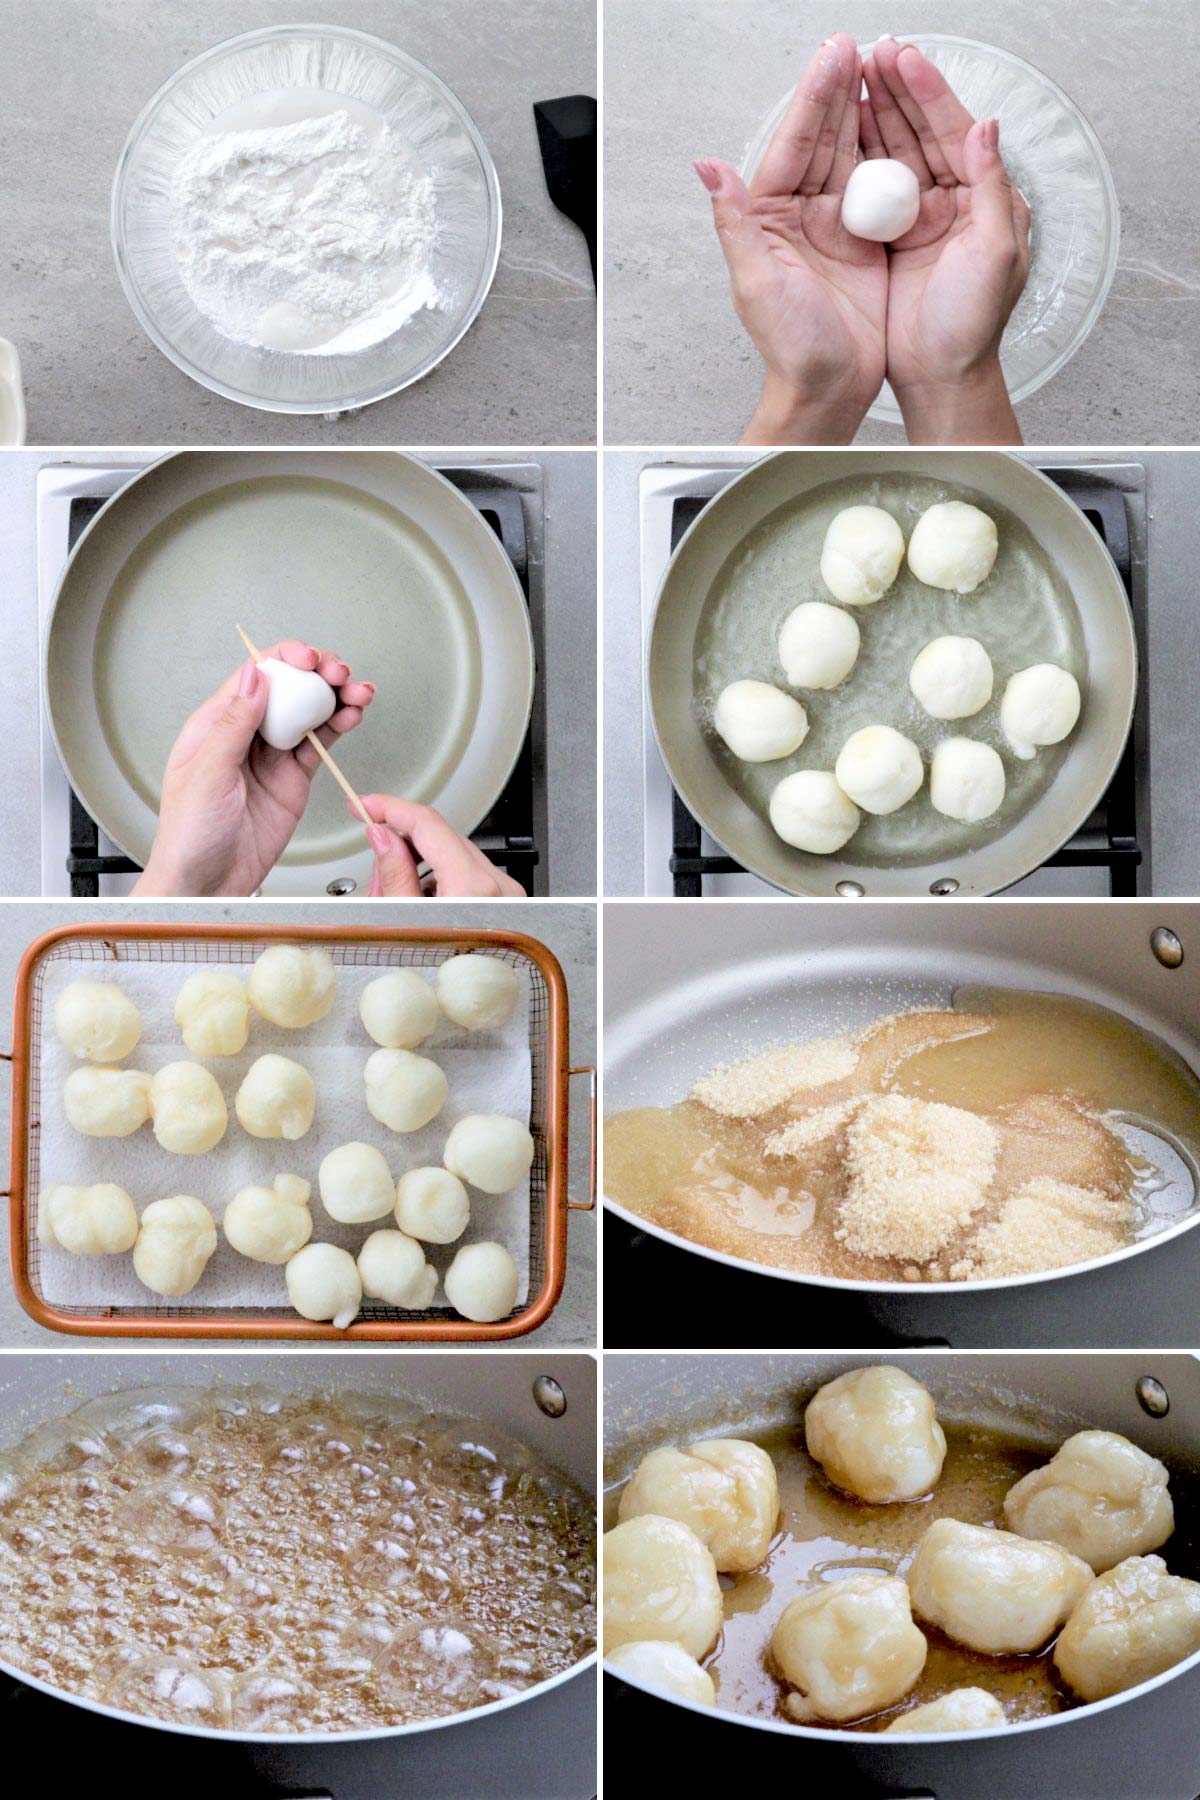 Steps on how to cook Carioca.